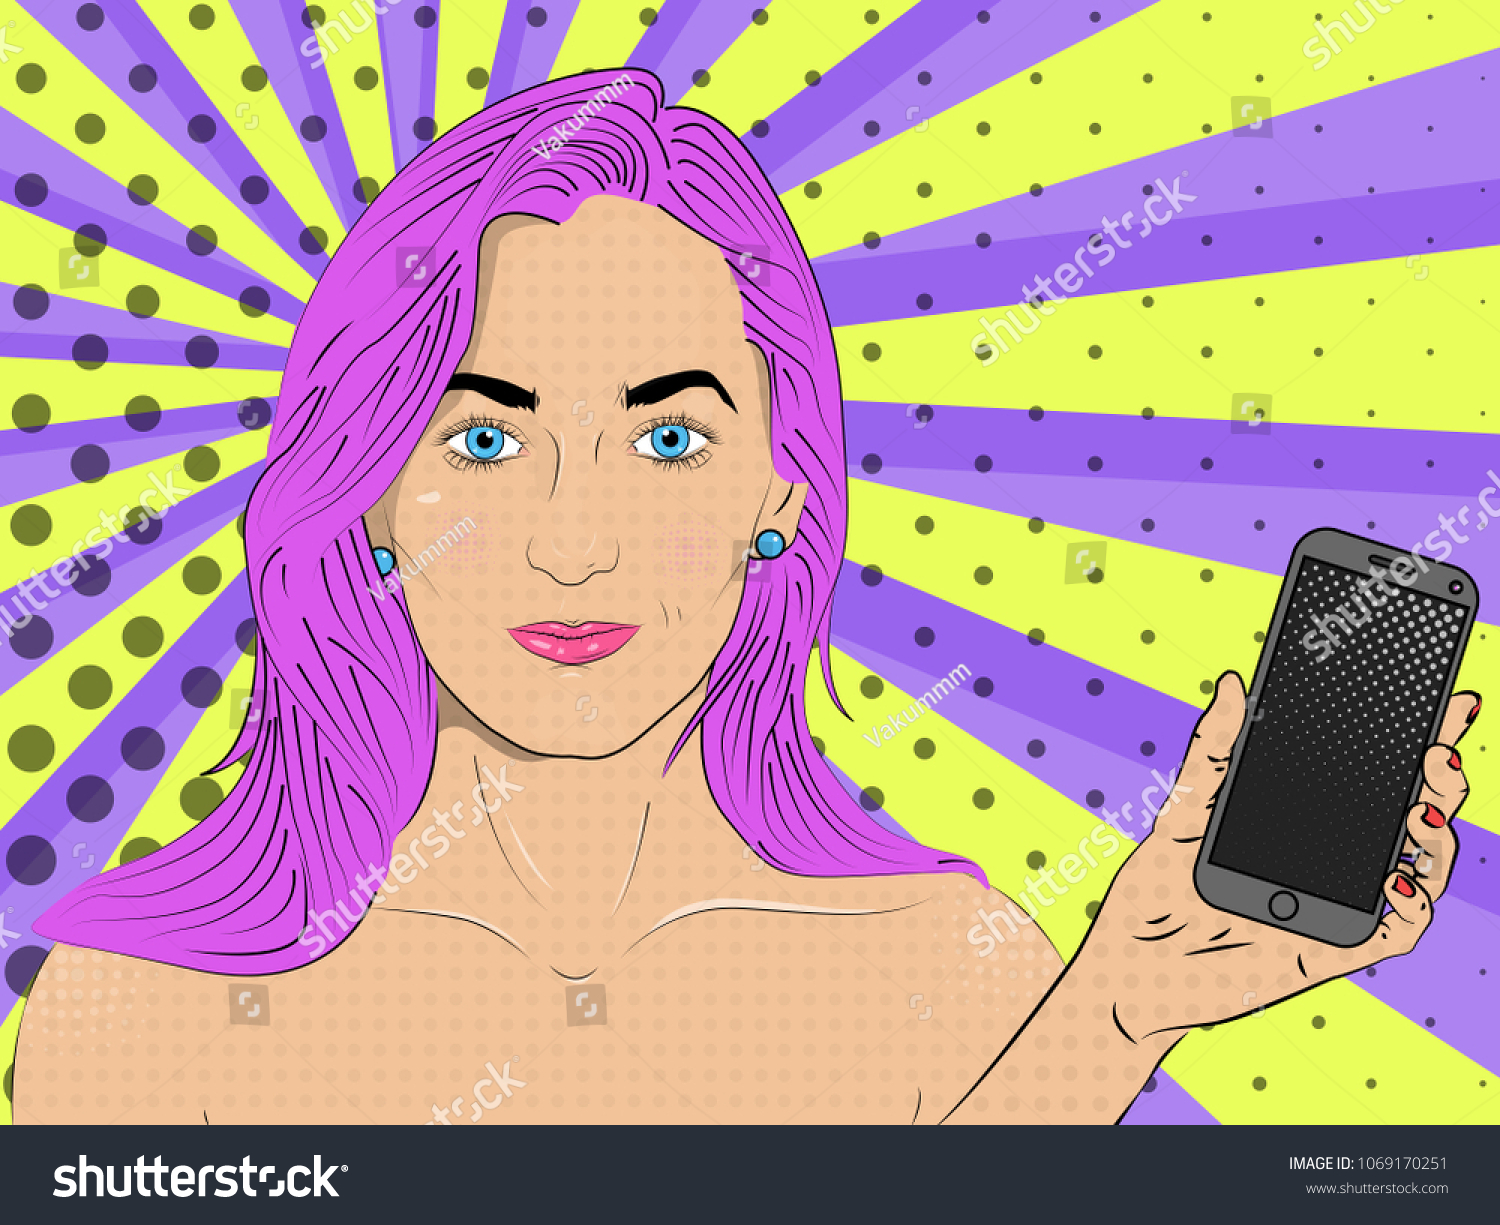 Vector Illustration Of Pop Art Style Young And Royalty Free Stock Vector 1069170251 